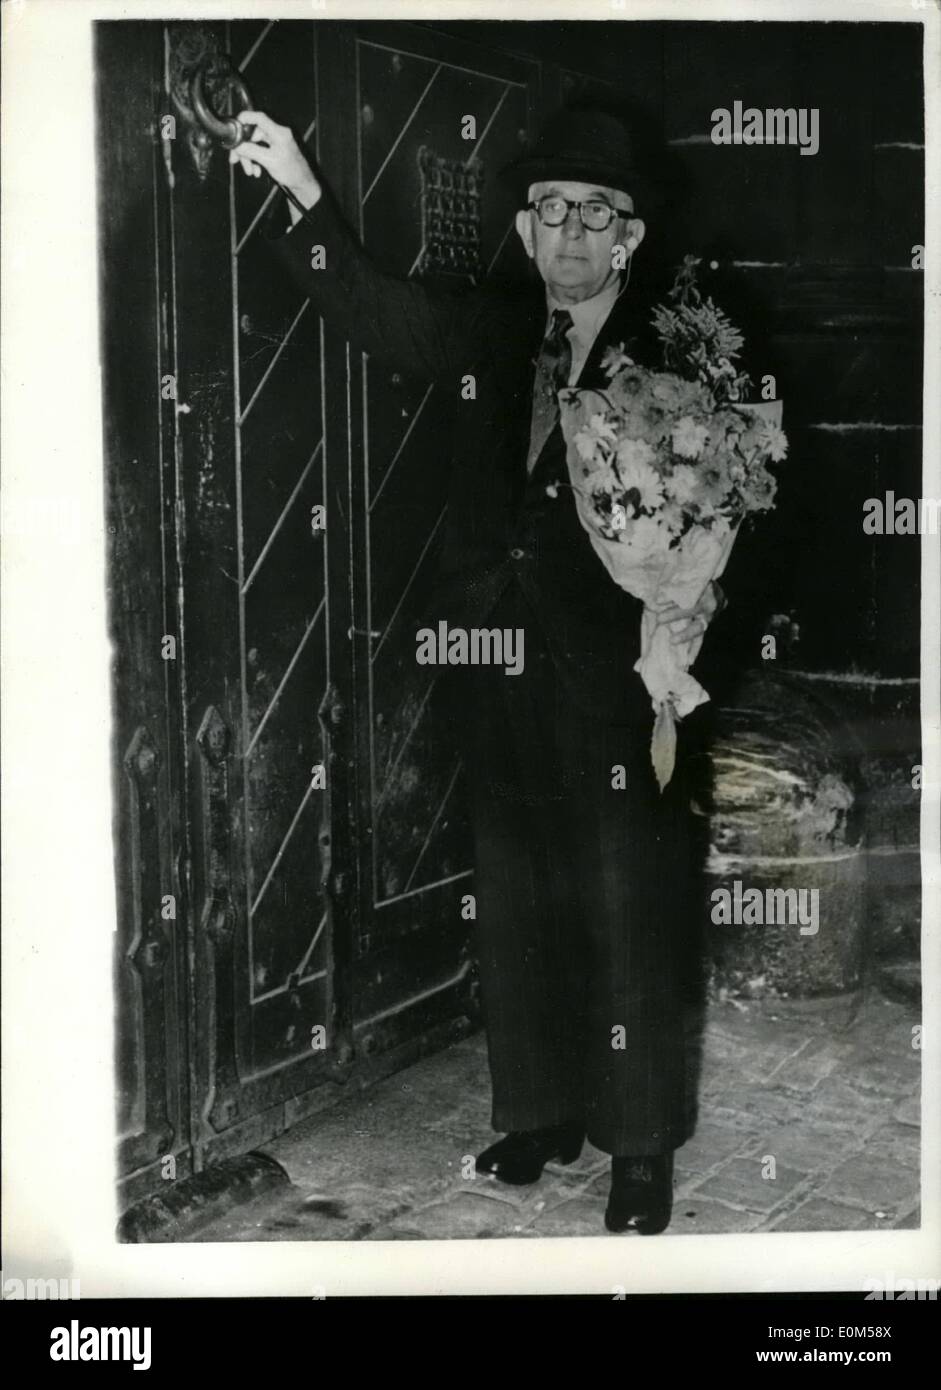 Aug. 08, 1953 - Mr. Merrified takes a bouquet to his wife at strangeways jail. Manchester. Photo shows Seventy one year old Mr. Stock Photo